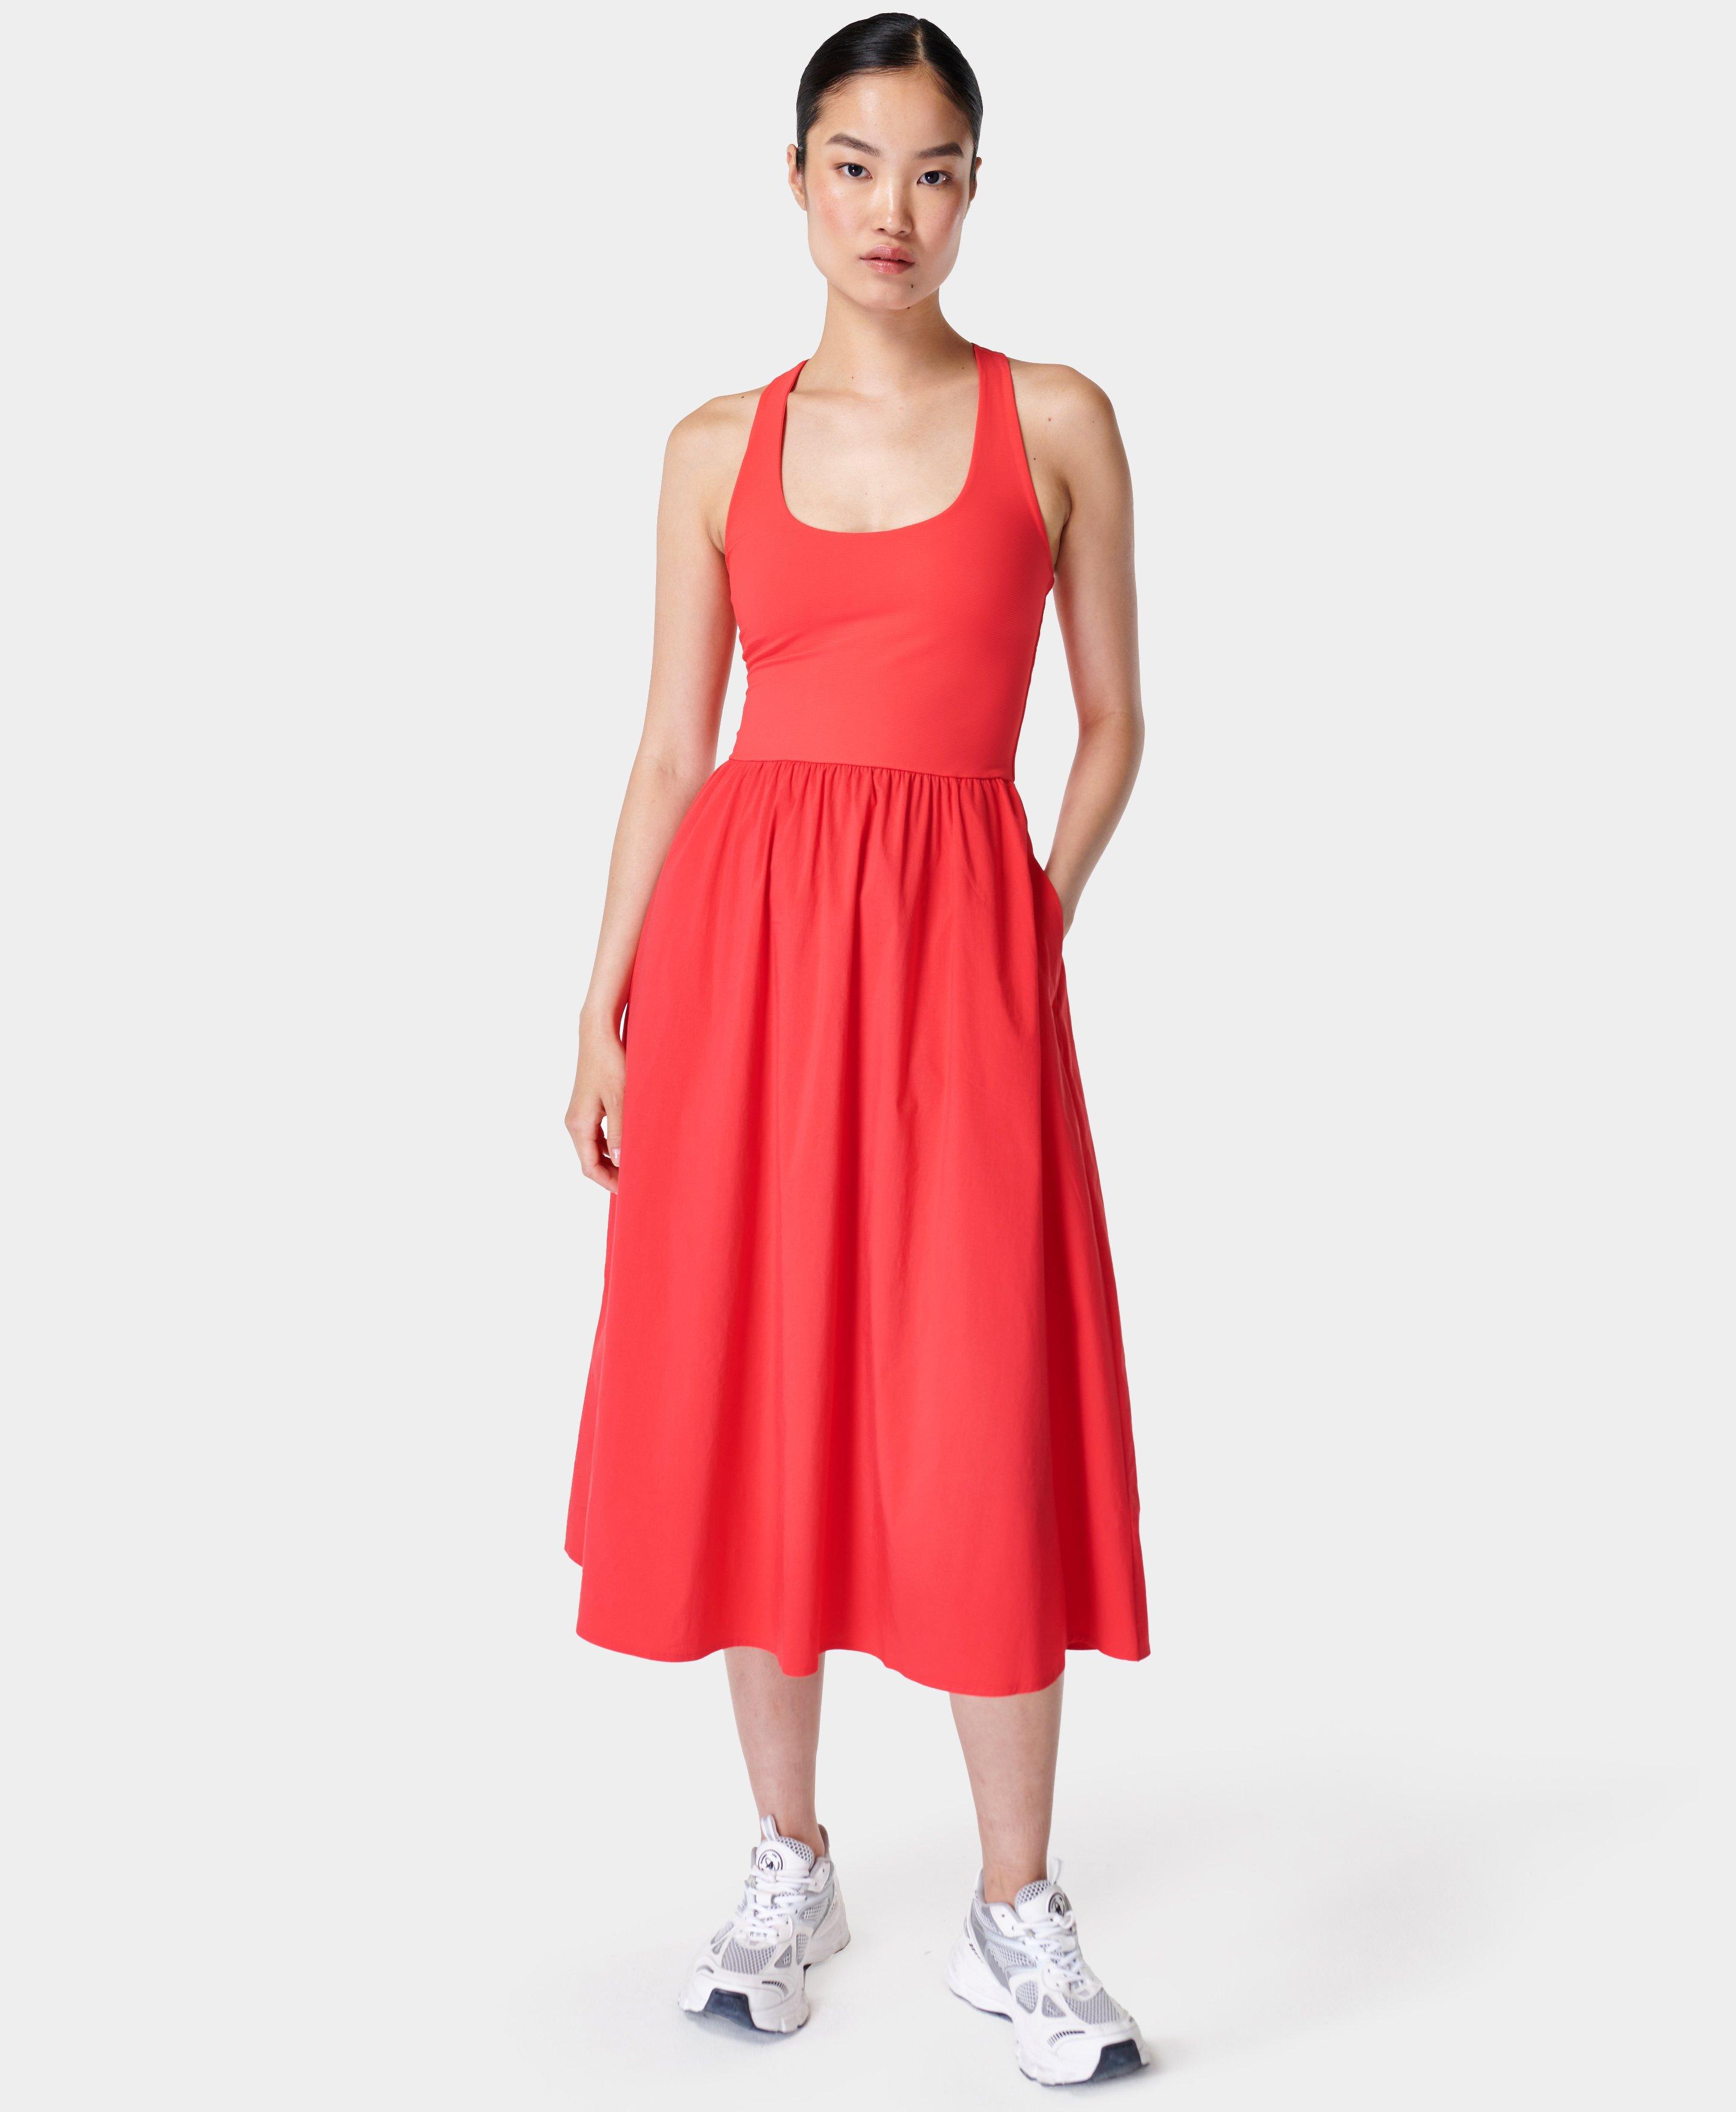 Explorer Ribbed Racer Dress - tulipred | Women's Dresses and Jumpsuits ...